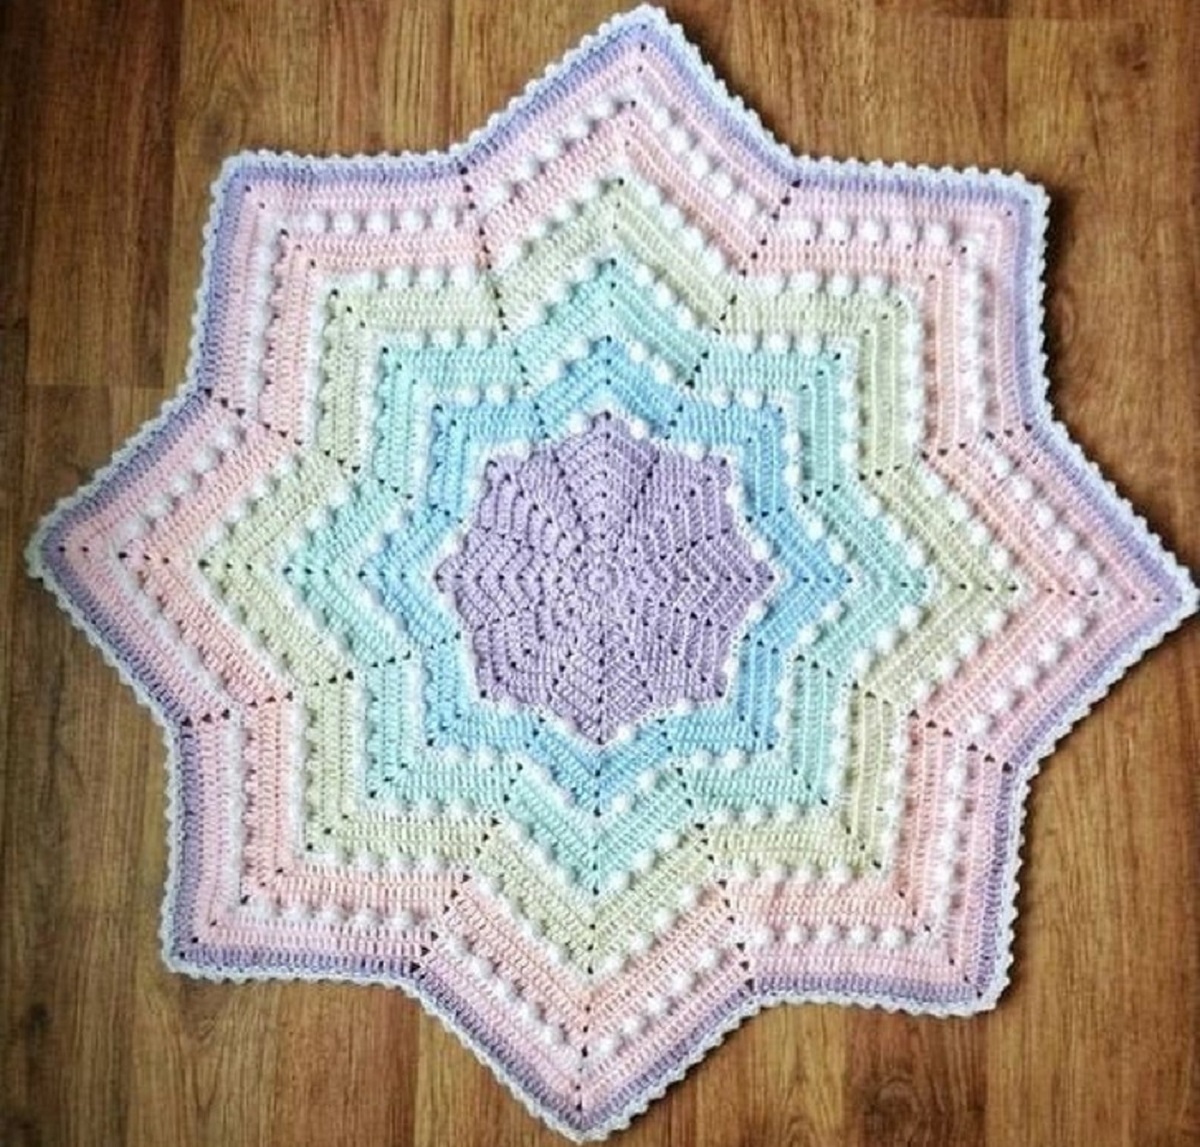 Pastel pink, purple, yellow, and blue star shaped crochet blanket with small white bobbles around each row of color.